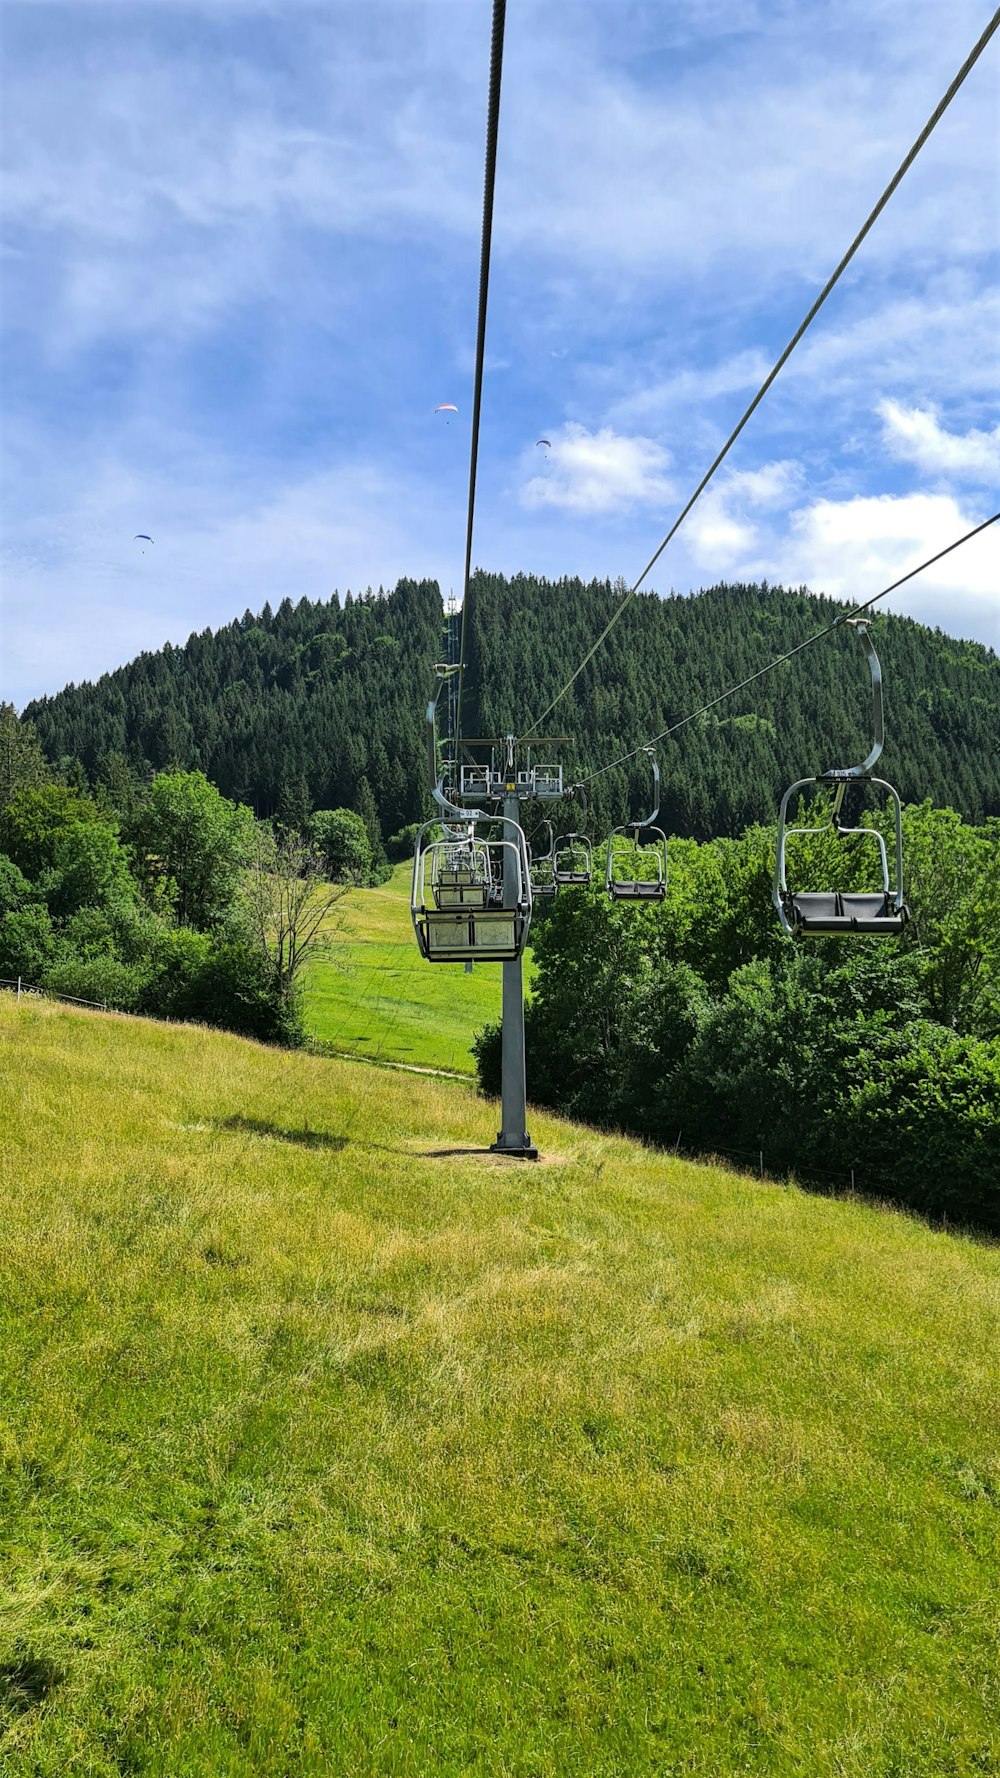 a chair lift above a grassy field